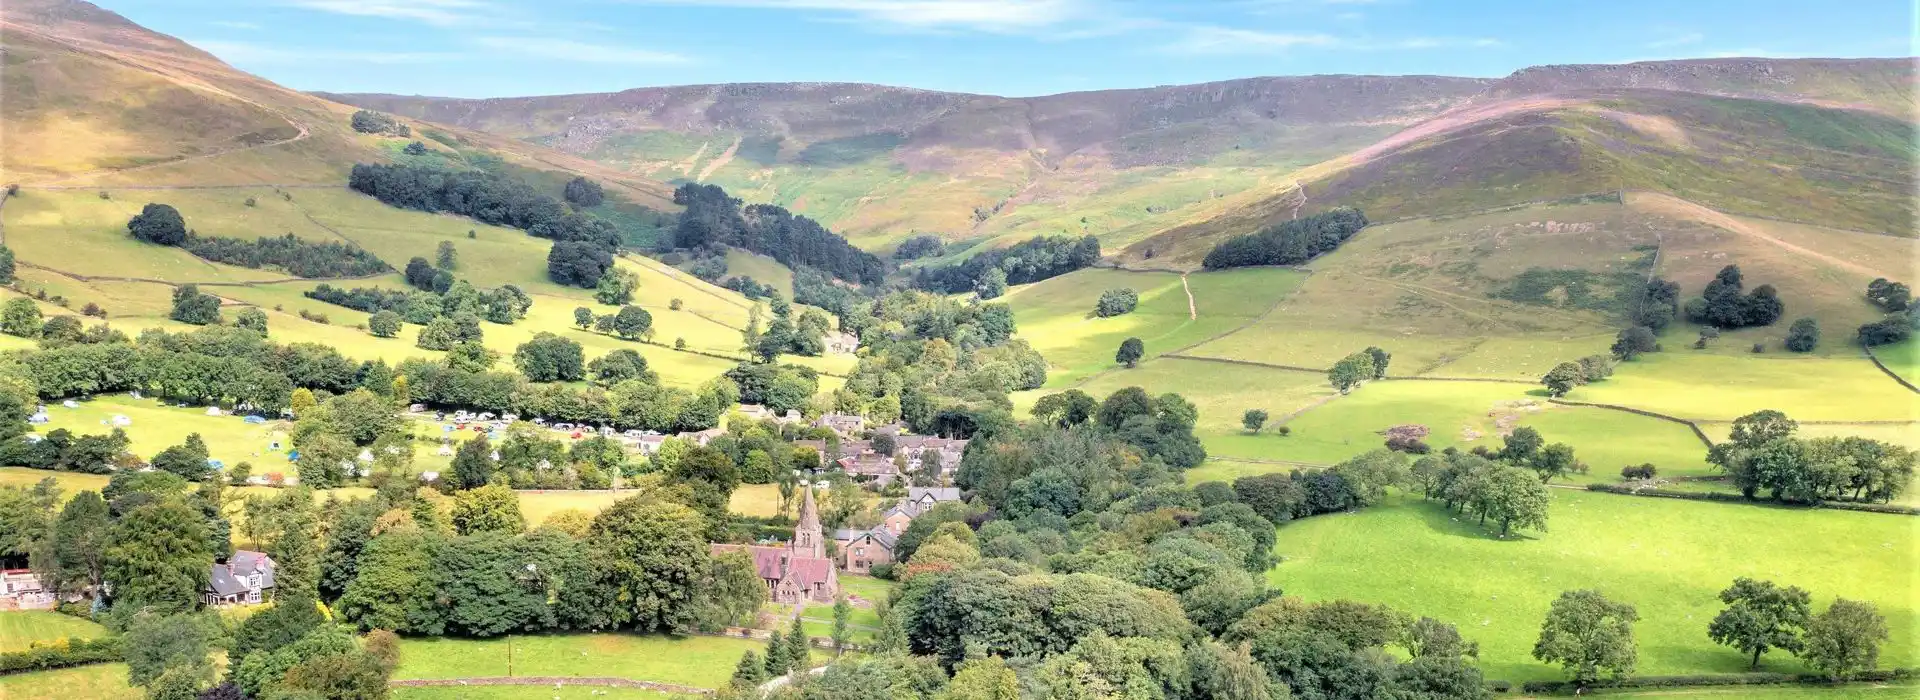 5 star campsites in Derbyshire and the Peak District